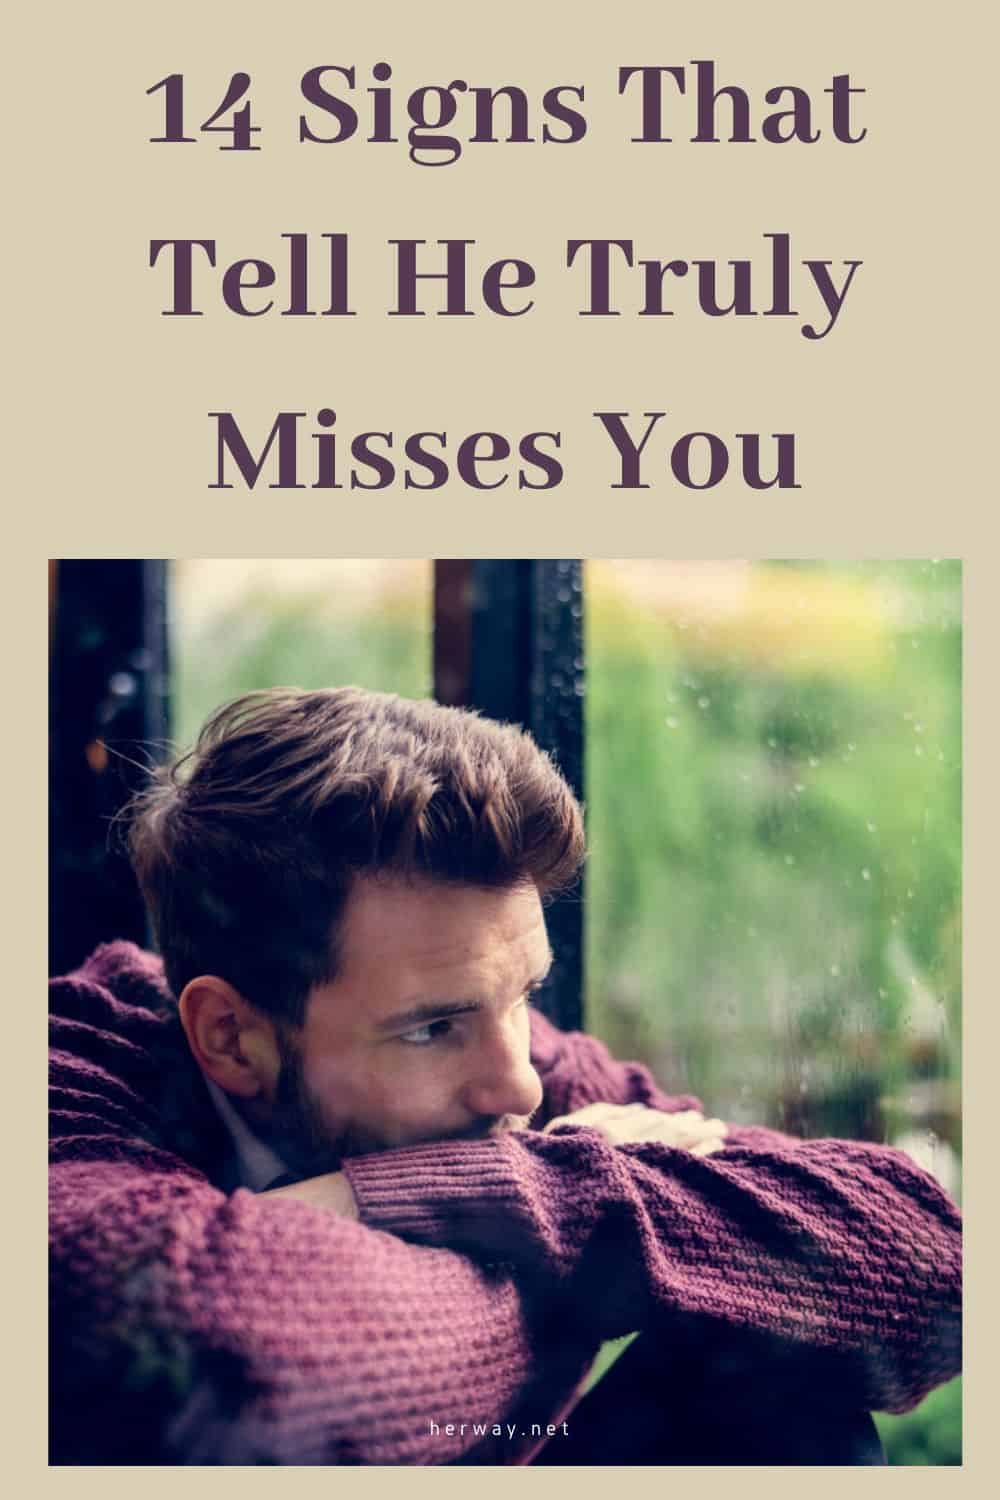 14 Signs That Tell He Truly Misses You